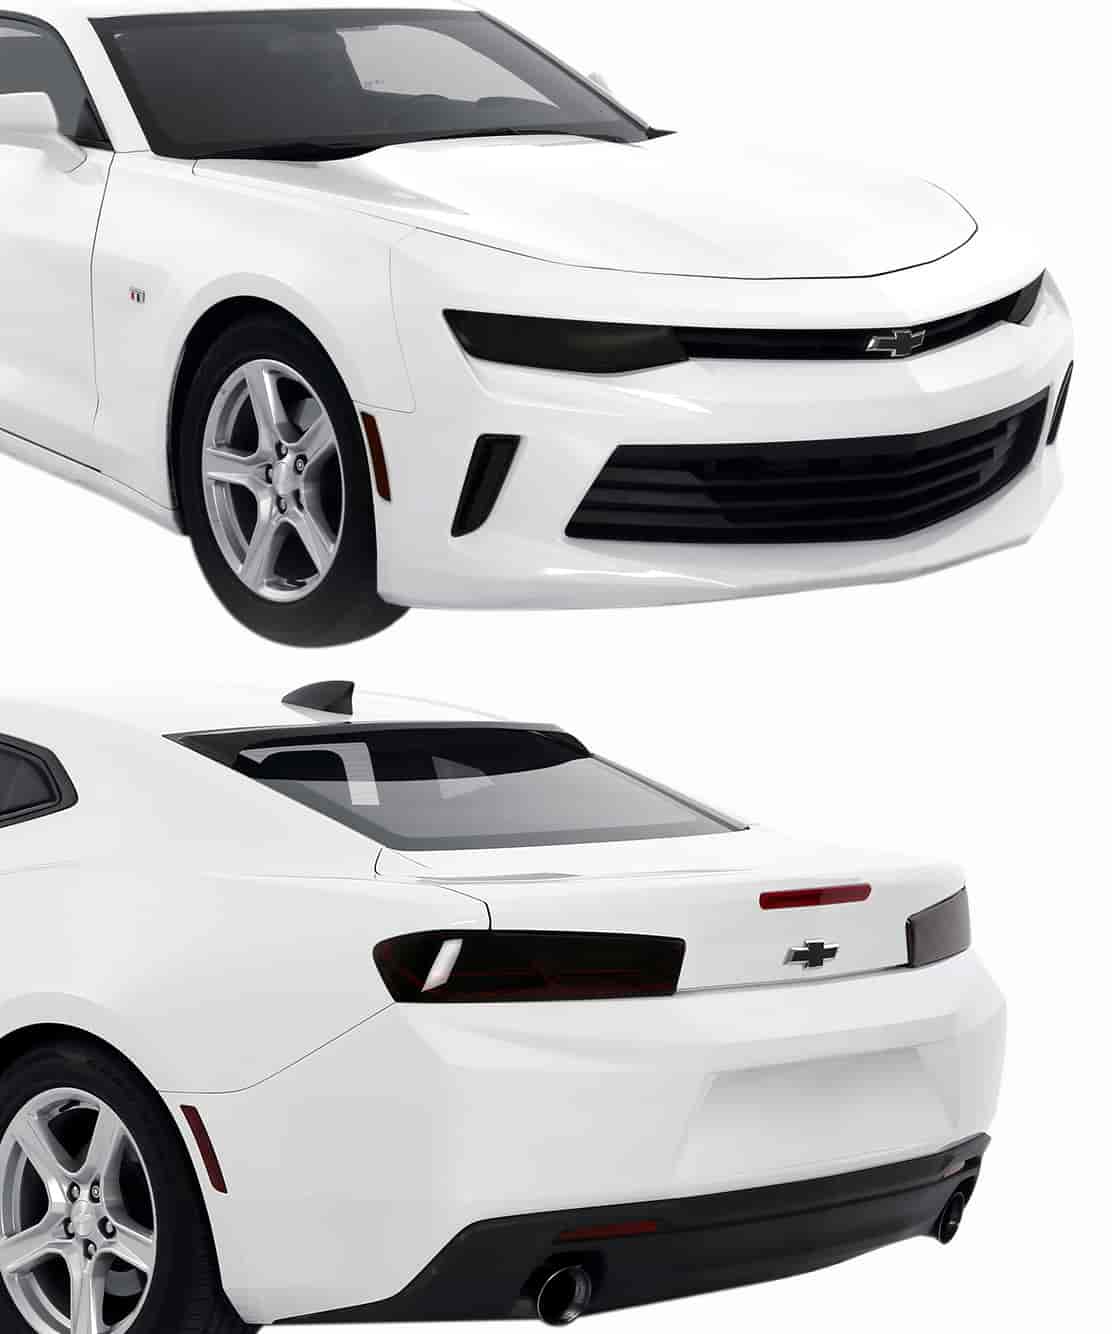 Smoked Light Cover Kit for 2016-2018 Chevy Camaro